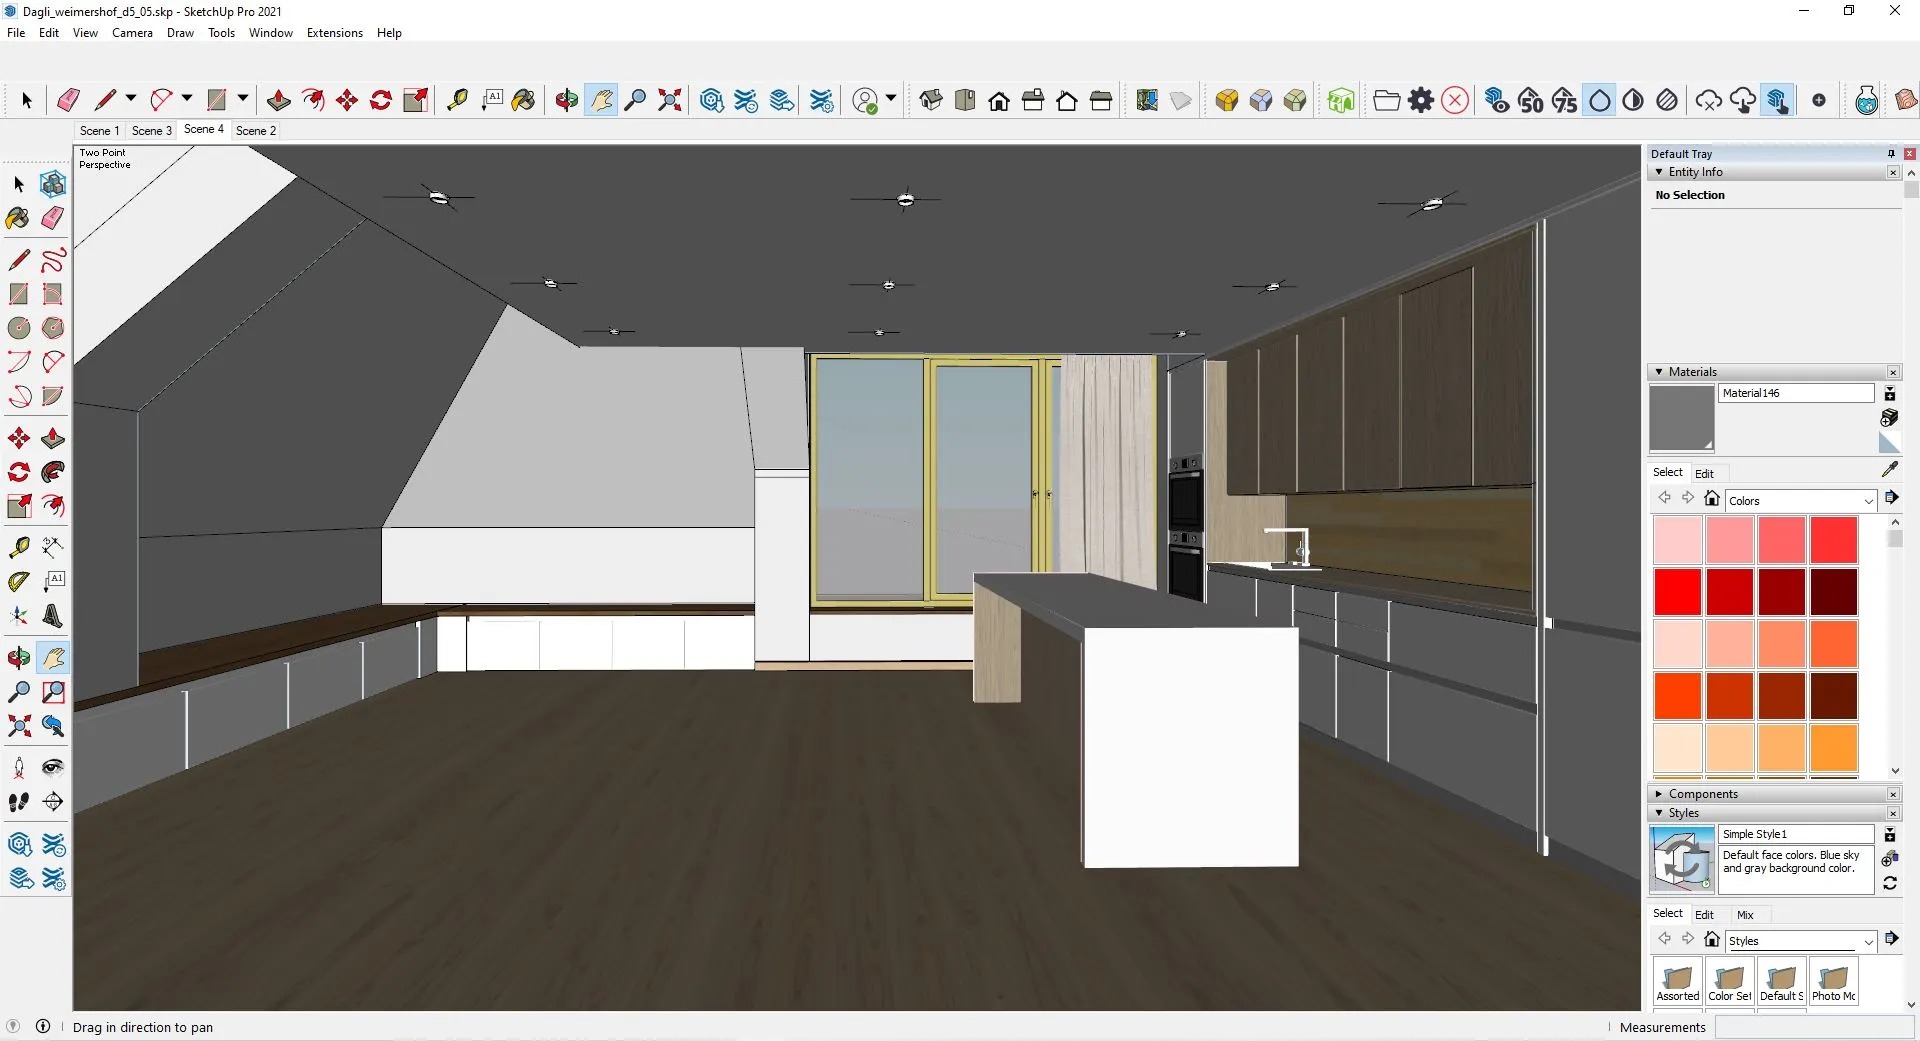 Les Maisons de Maîtres Églantiers, viewing the kitchen and living area in SketchUp 